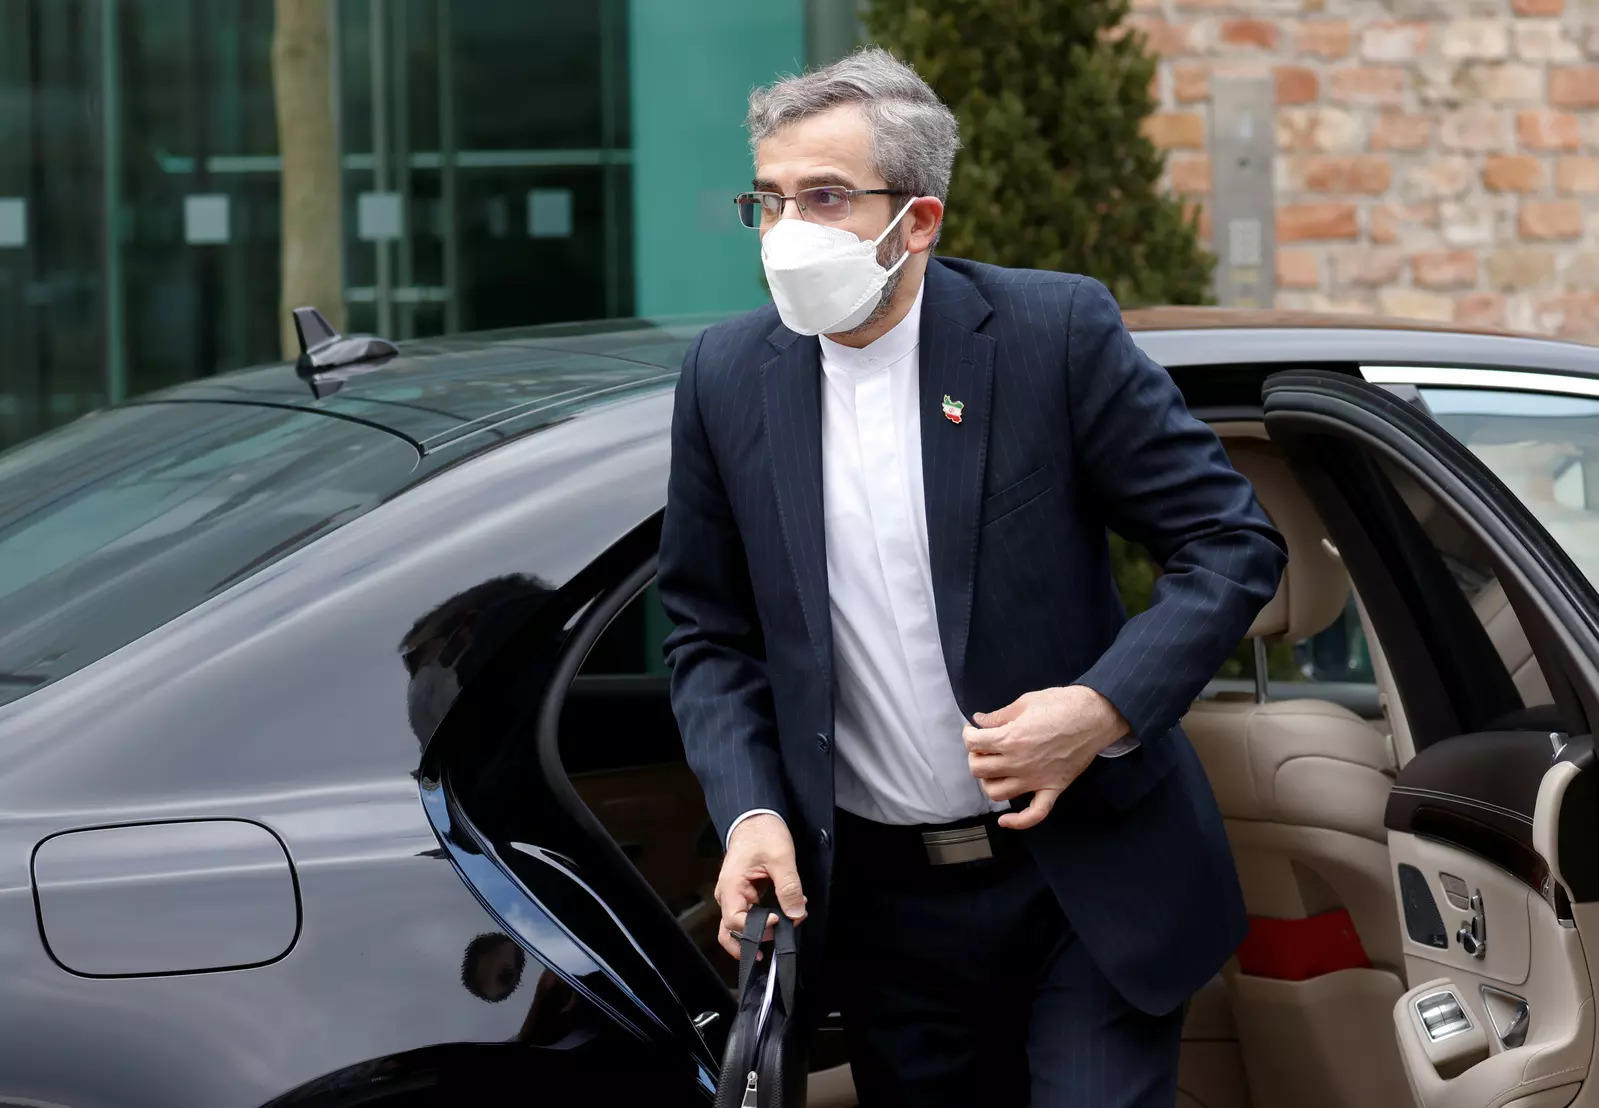  Iran's chief nuclear negotiator Ali Bagheri Kani arrives at Palais Coburg where closed-door nuclear talks with Iran take place in Vienna, Austria (File photo)